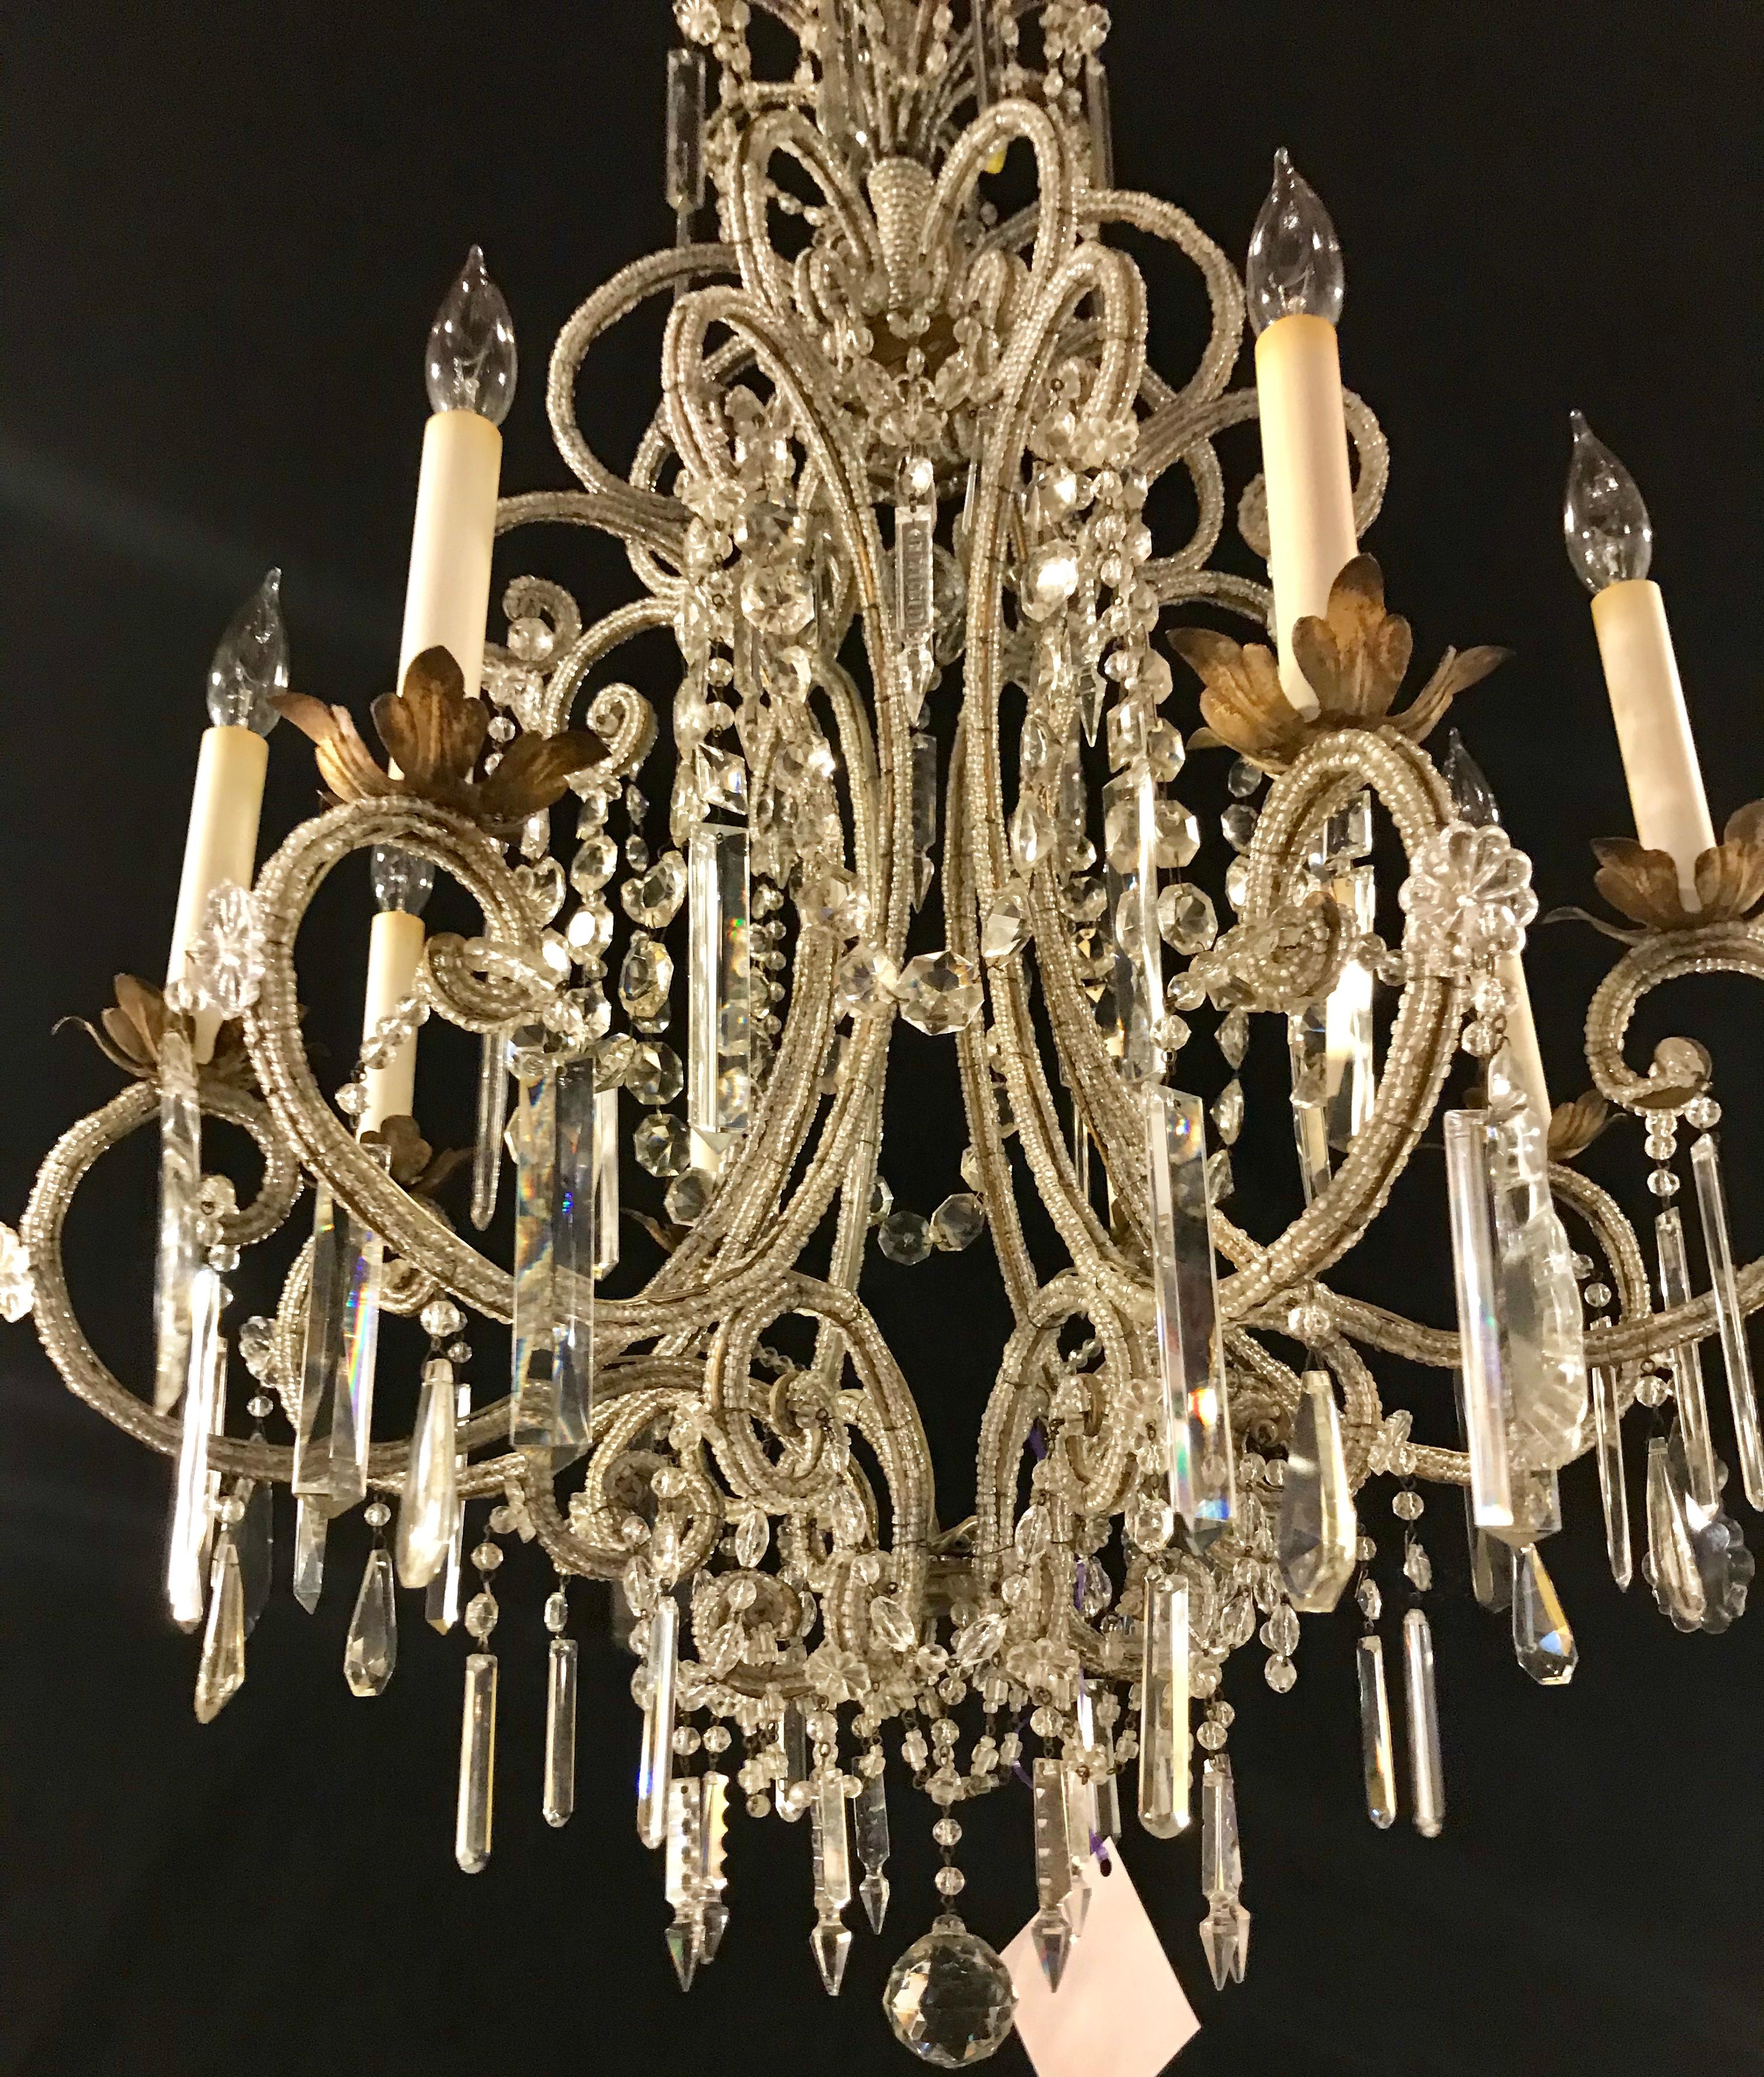 Gilt metal bobeches on this 8-light crystal frame beaded with hanging crystal prisms chandelier. This item has new wiring.